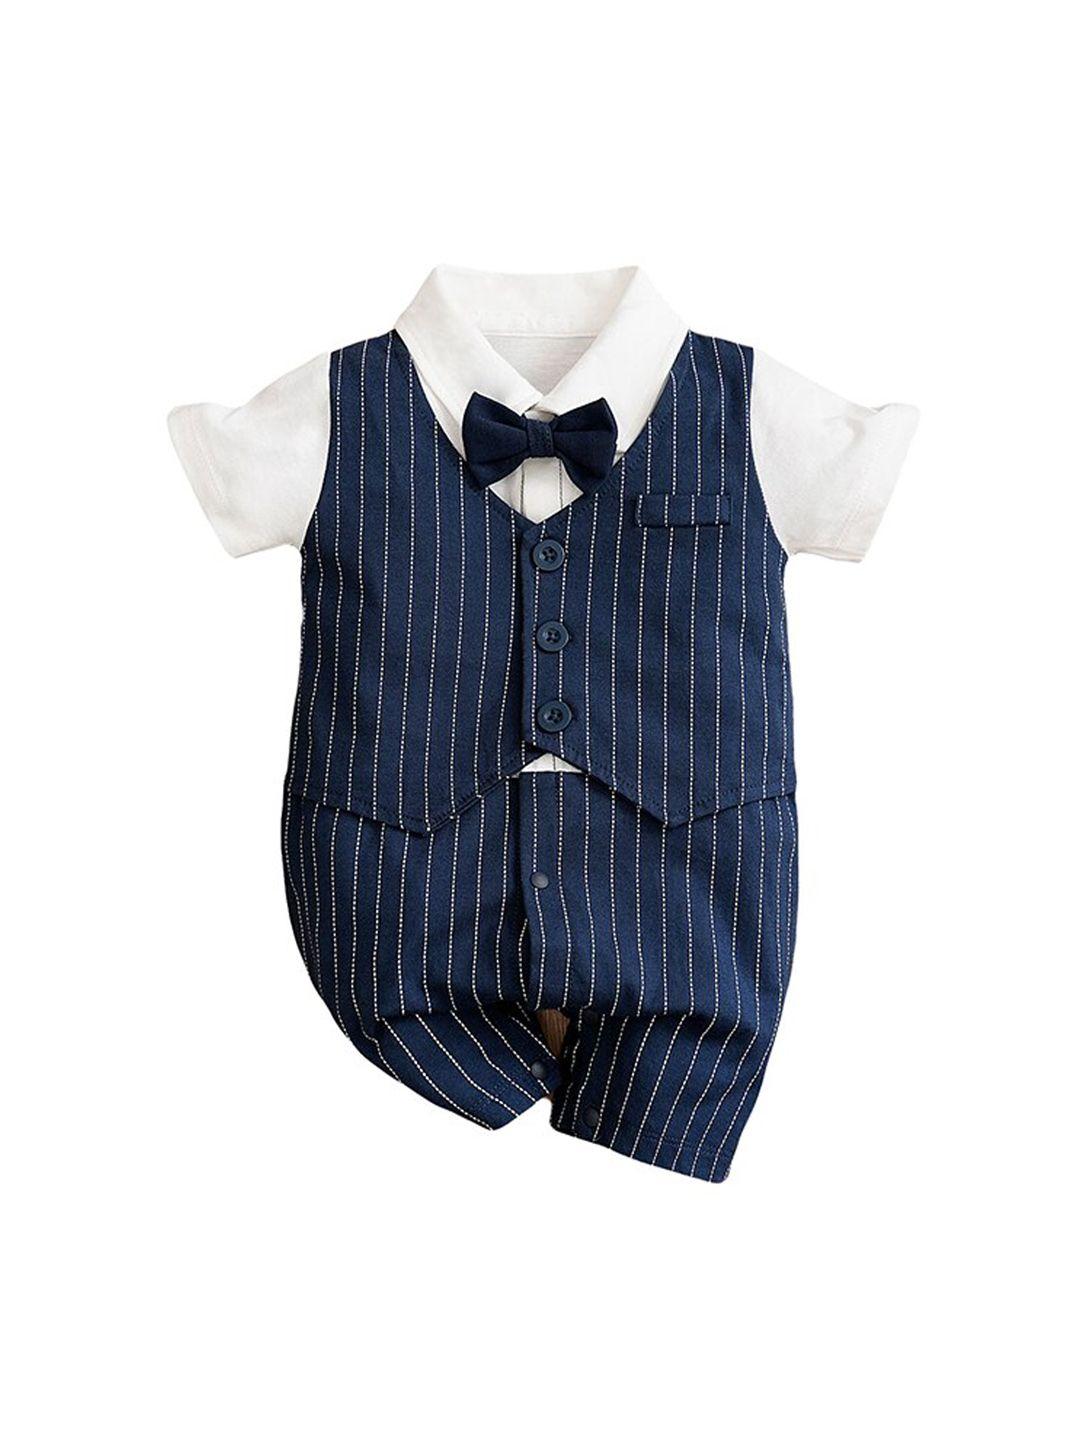 stylecast-infant-boys-navy-blue-striped-spread-collar-pure-cotton-rompers